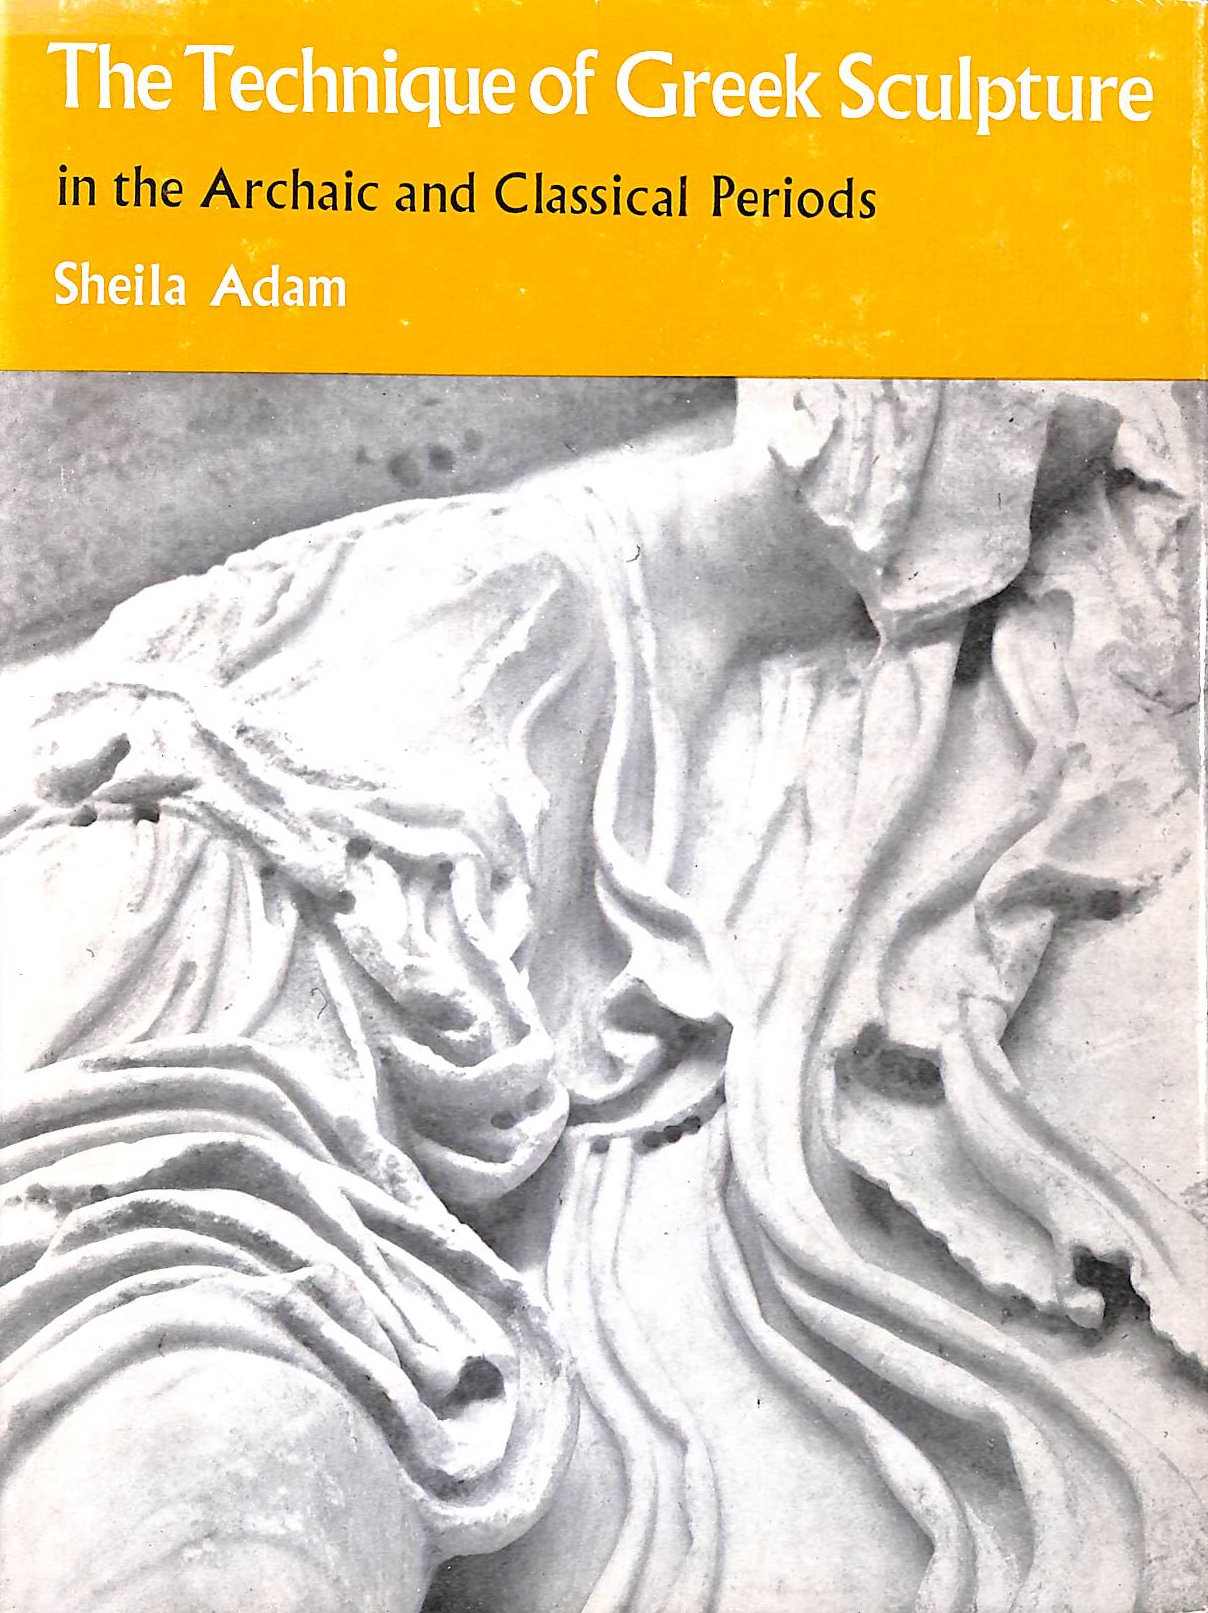 ADAM, SHEILA - Technique of Greek Sculpture in the Archaic and Classical Periods (British School of Archaeology , Athens, Publications)